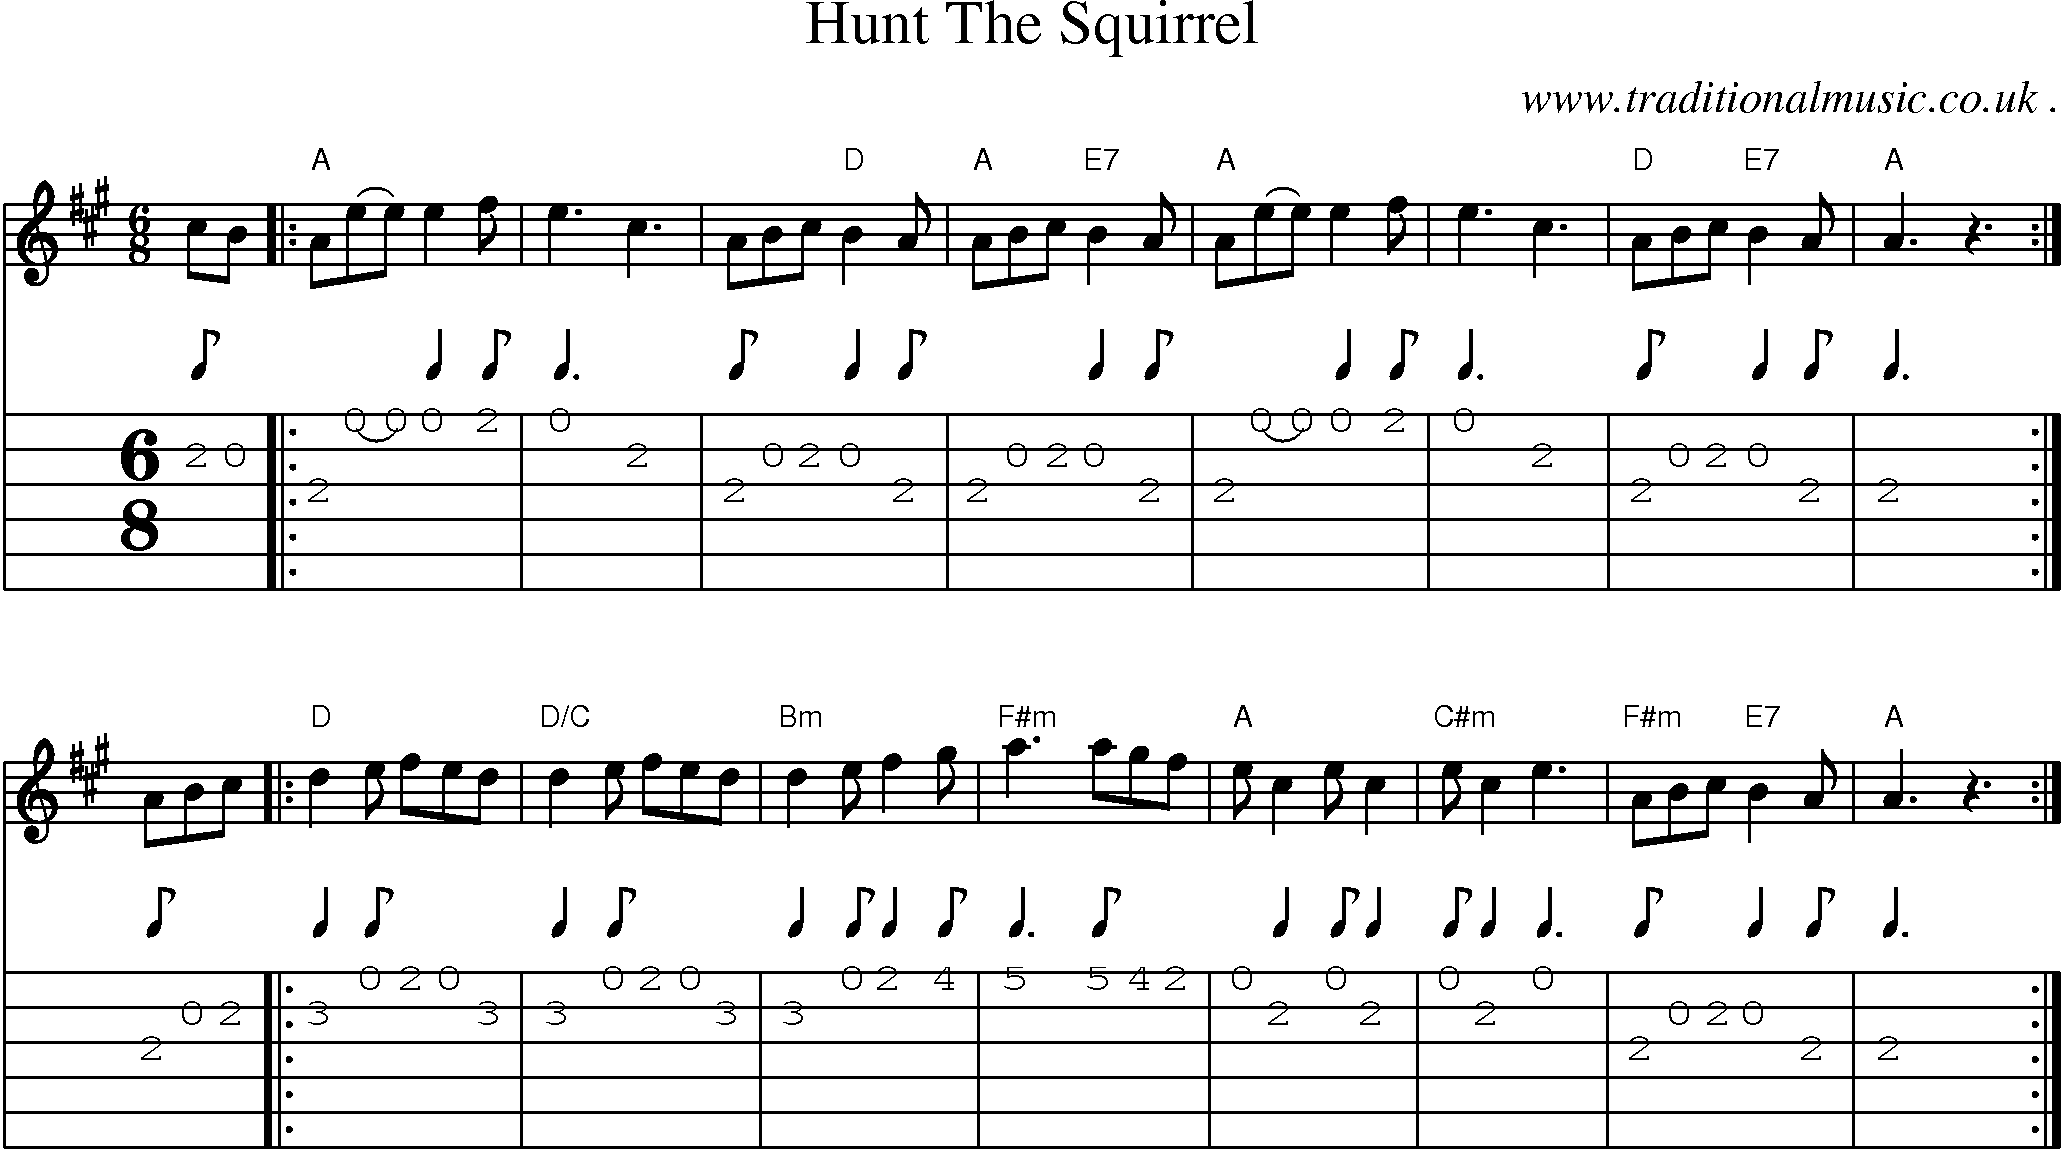 Sheet-music  score, Chords and Guitar Tabs for Hunt The Squirrel